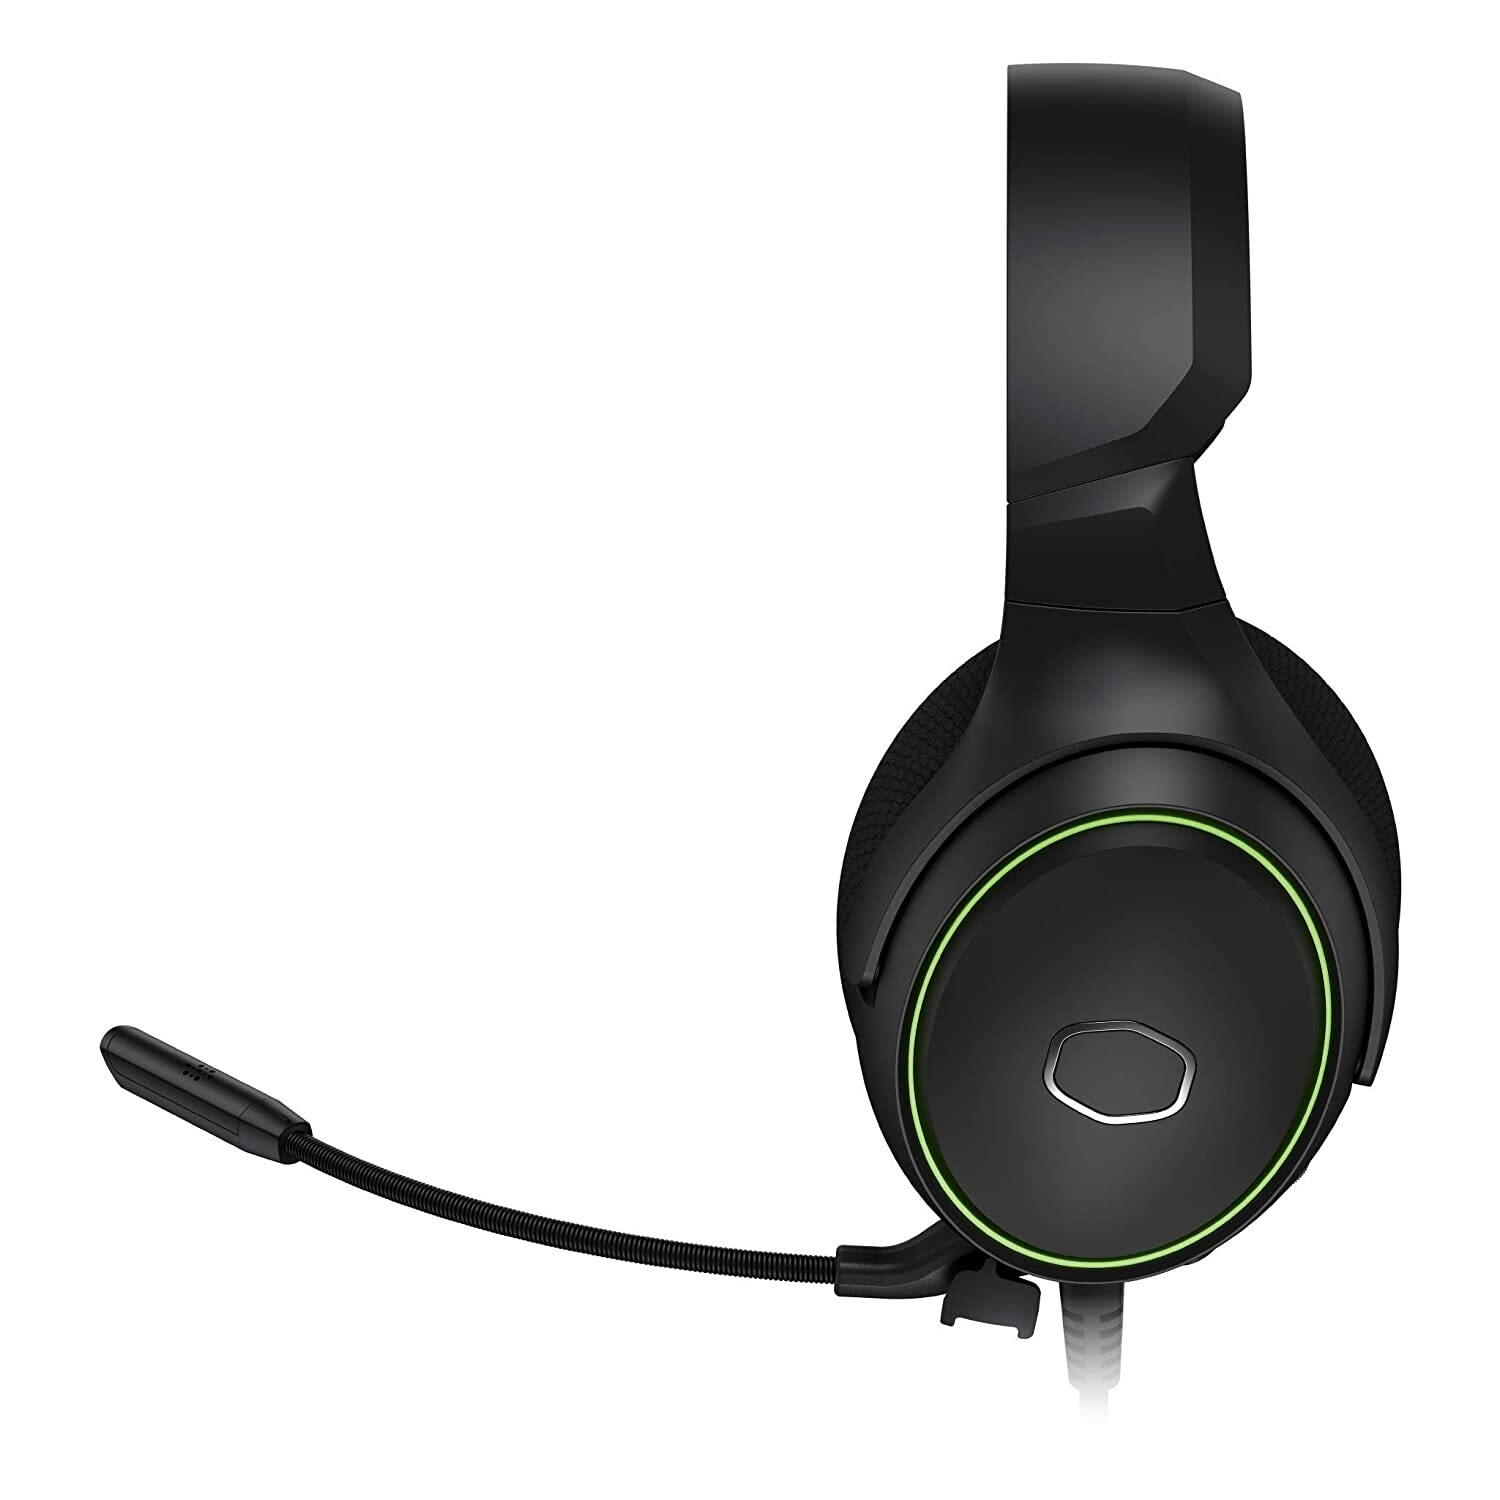 Cooler Master MH650 RGB 7.1 Virtual Surround Sound USB Gaming Headset with 50 mm Drivers and Omnidirectional Mic, Black